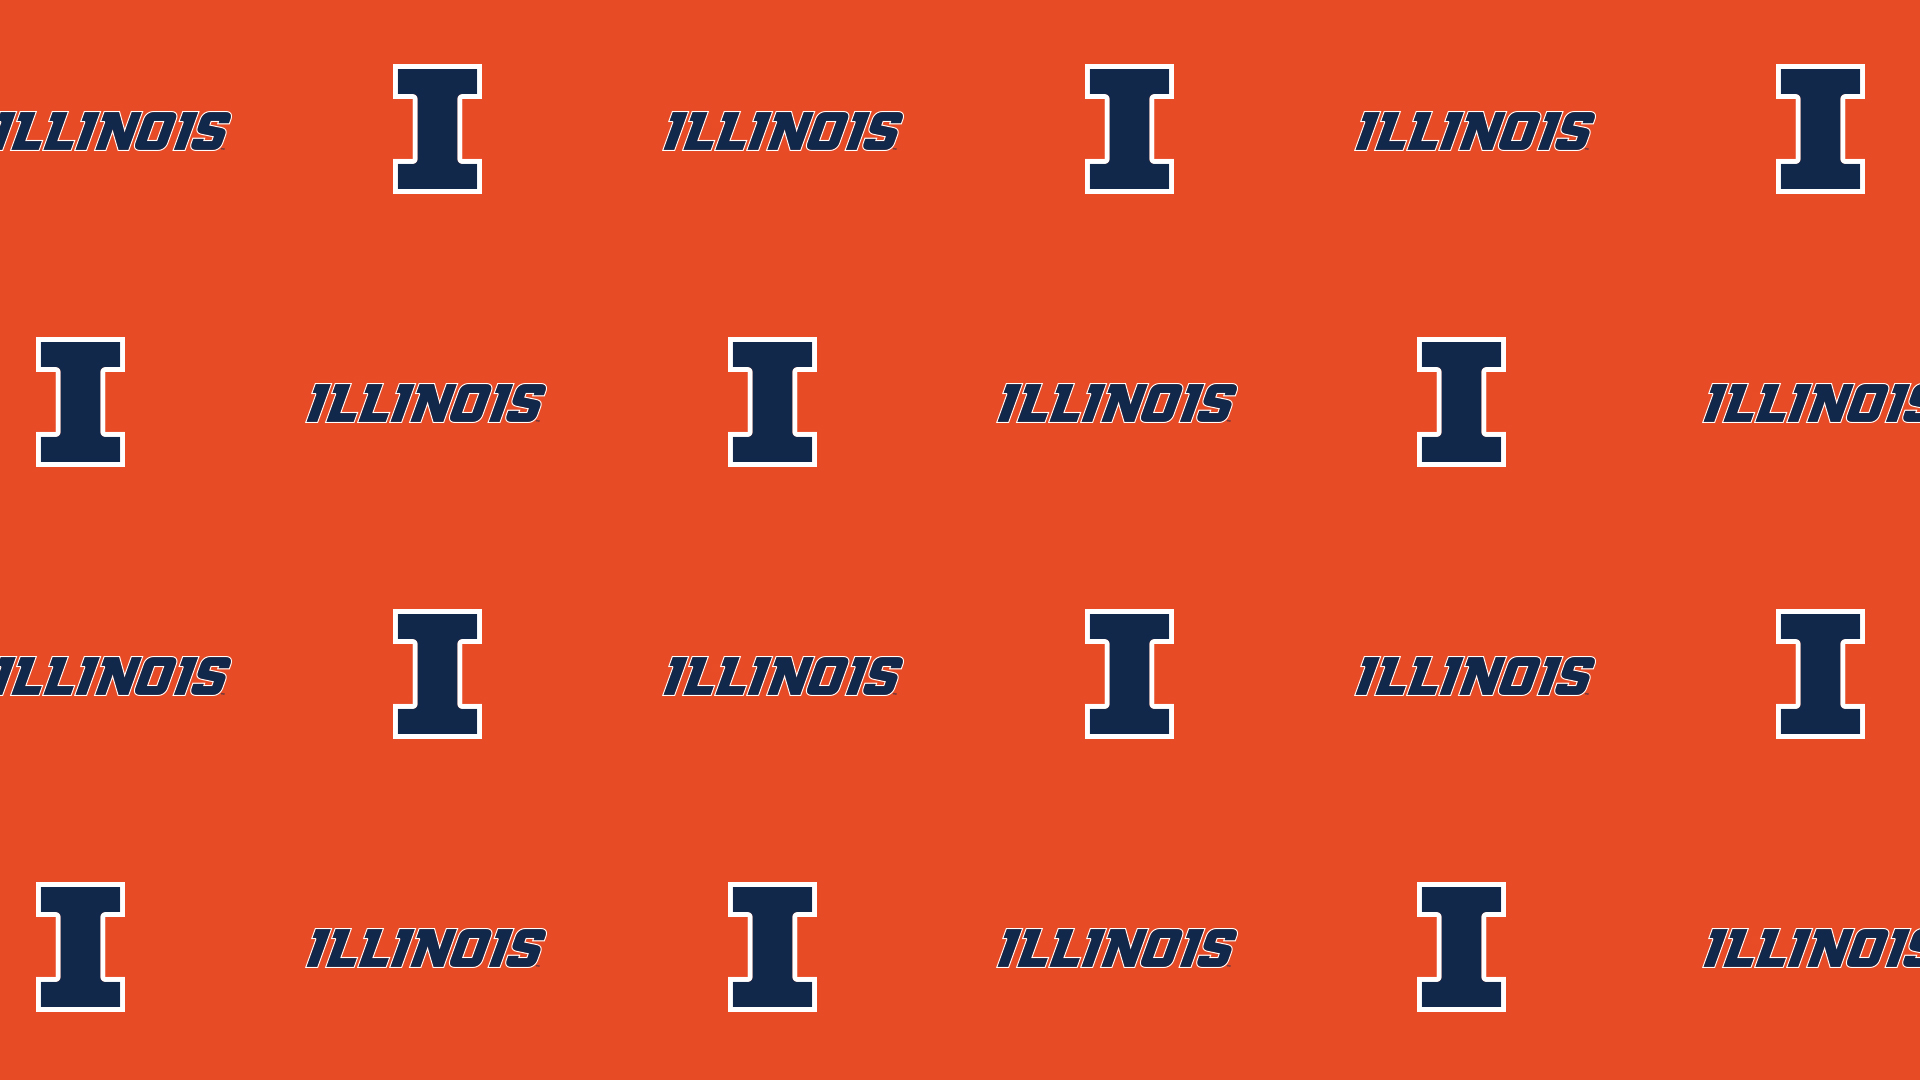 Video Conference Background of Illinois Athletics